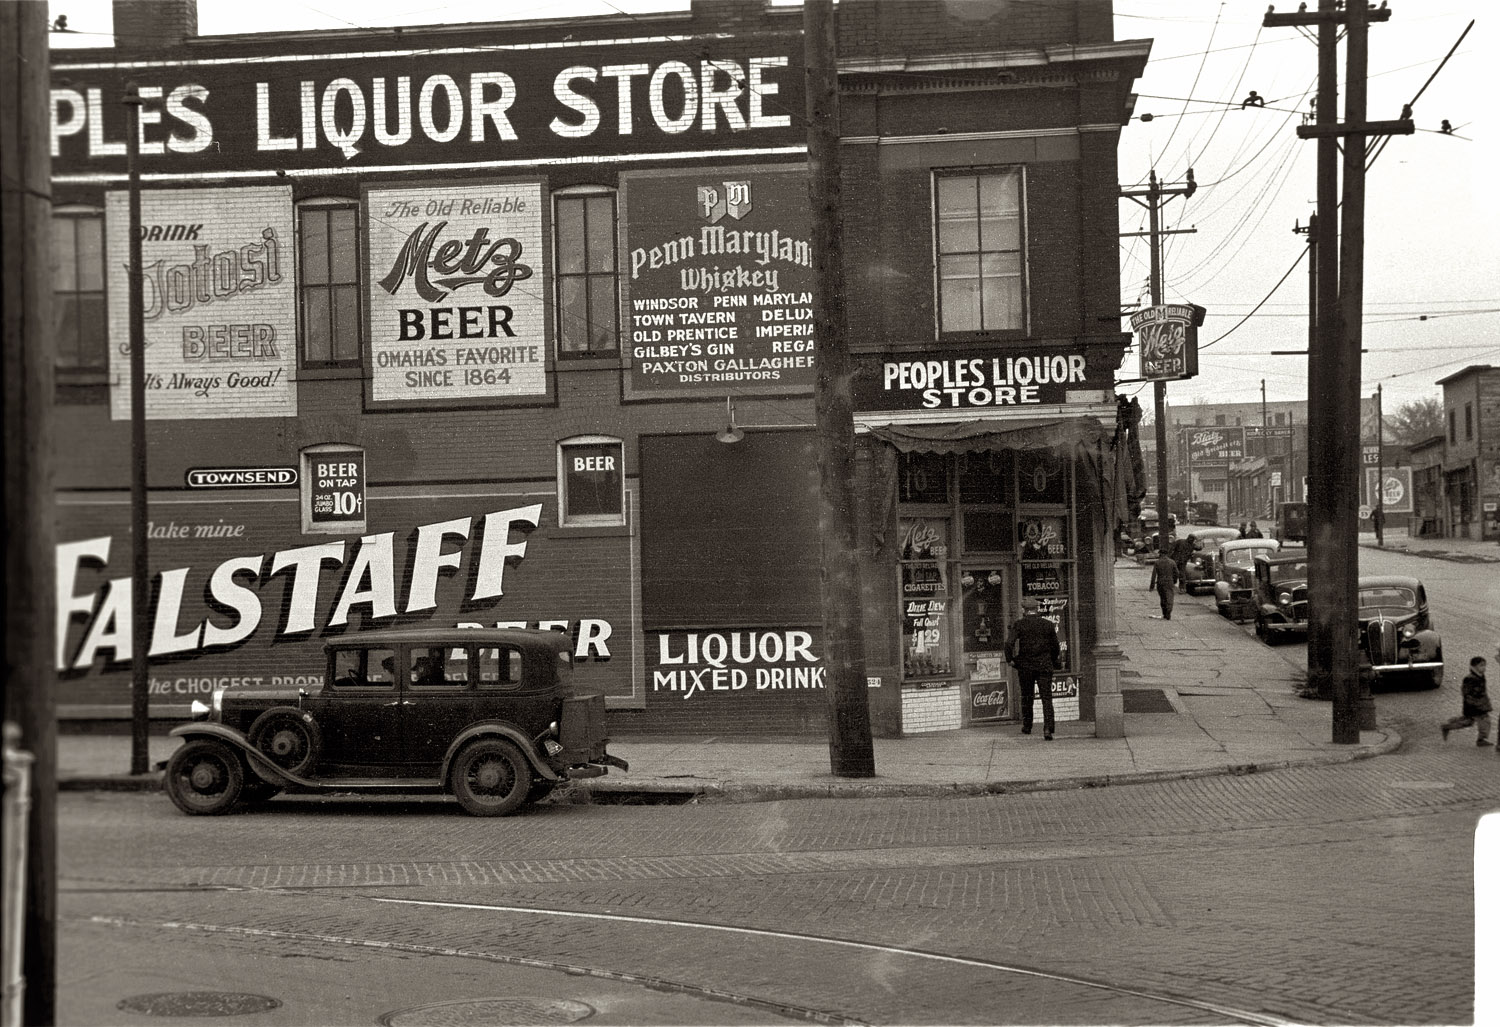 November 1938. Liquor store in Omaha, Nebraska. View full size. 35mm nitrate negative by John Vachon for the Farm Security Administration.